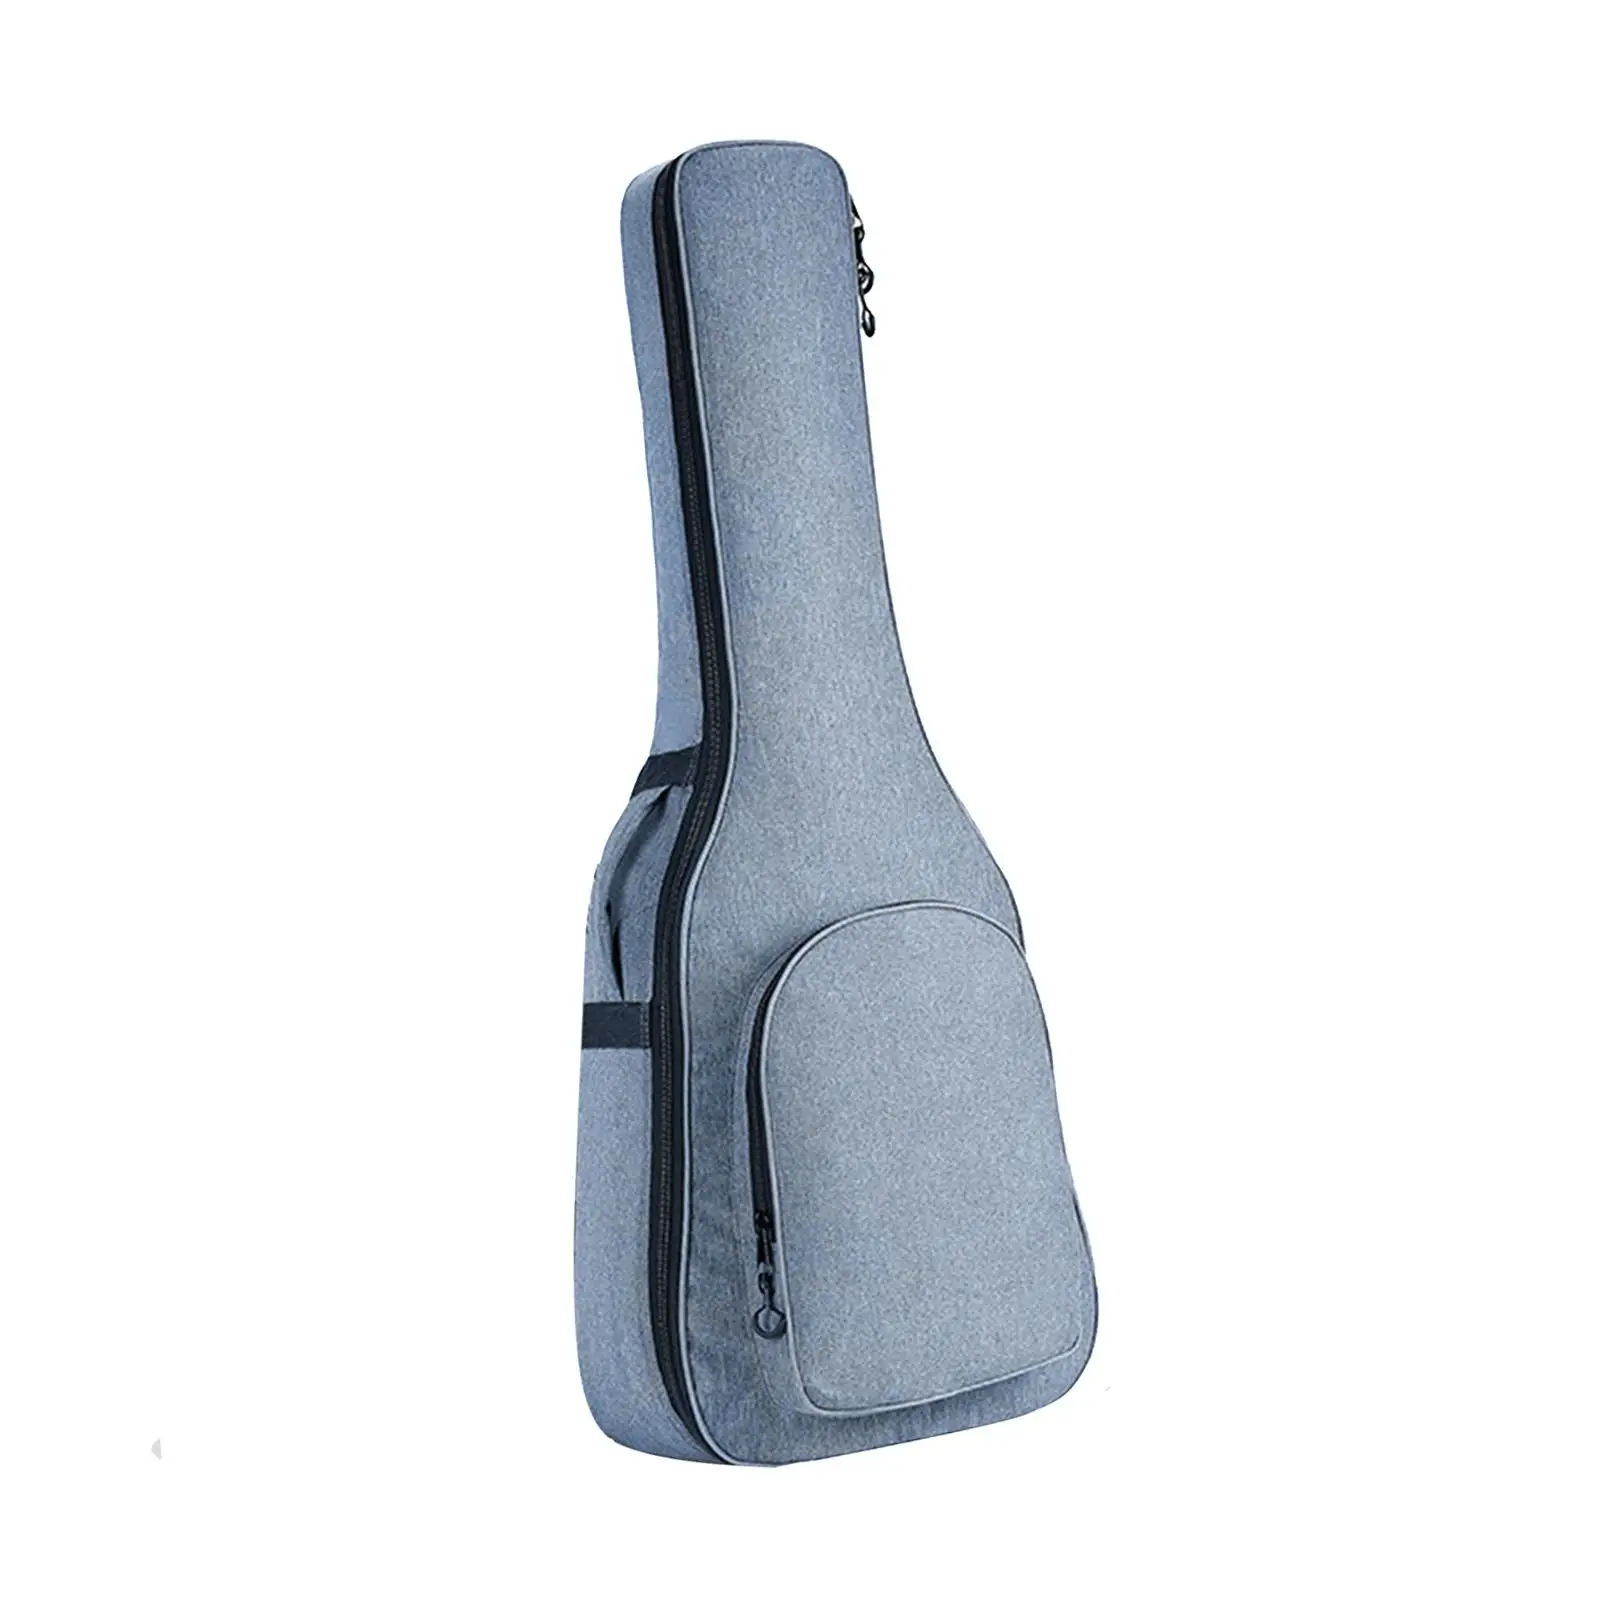 41 inch Guitar Case Heavy Duty Durable Bag Holder Extra Thicker for Guitar Accessories